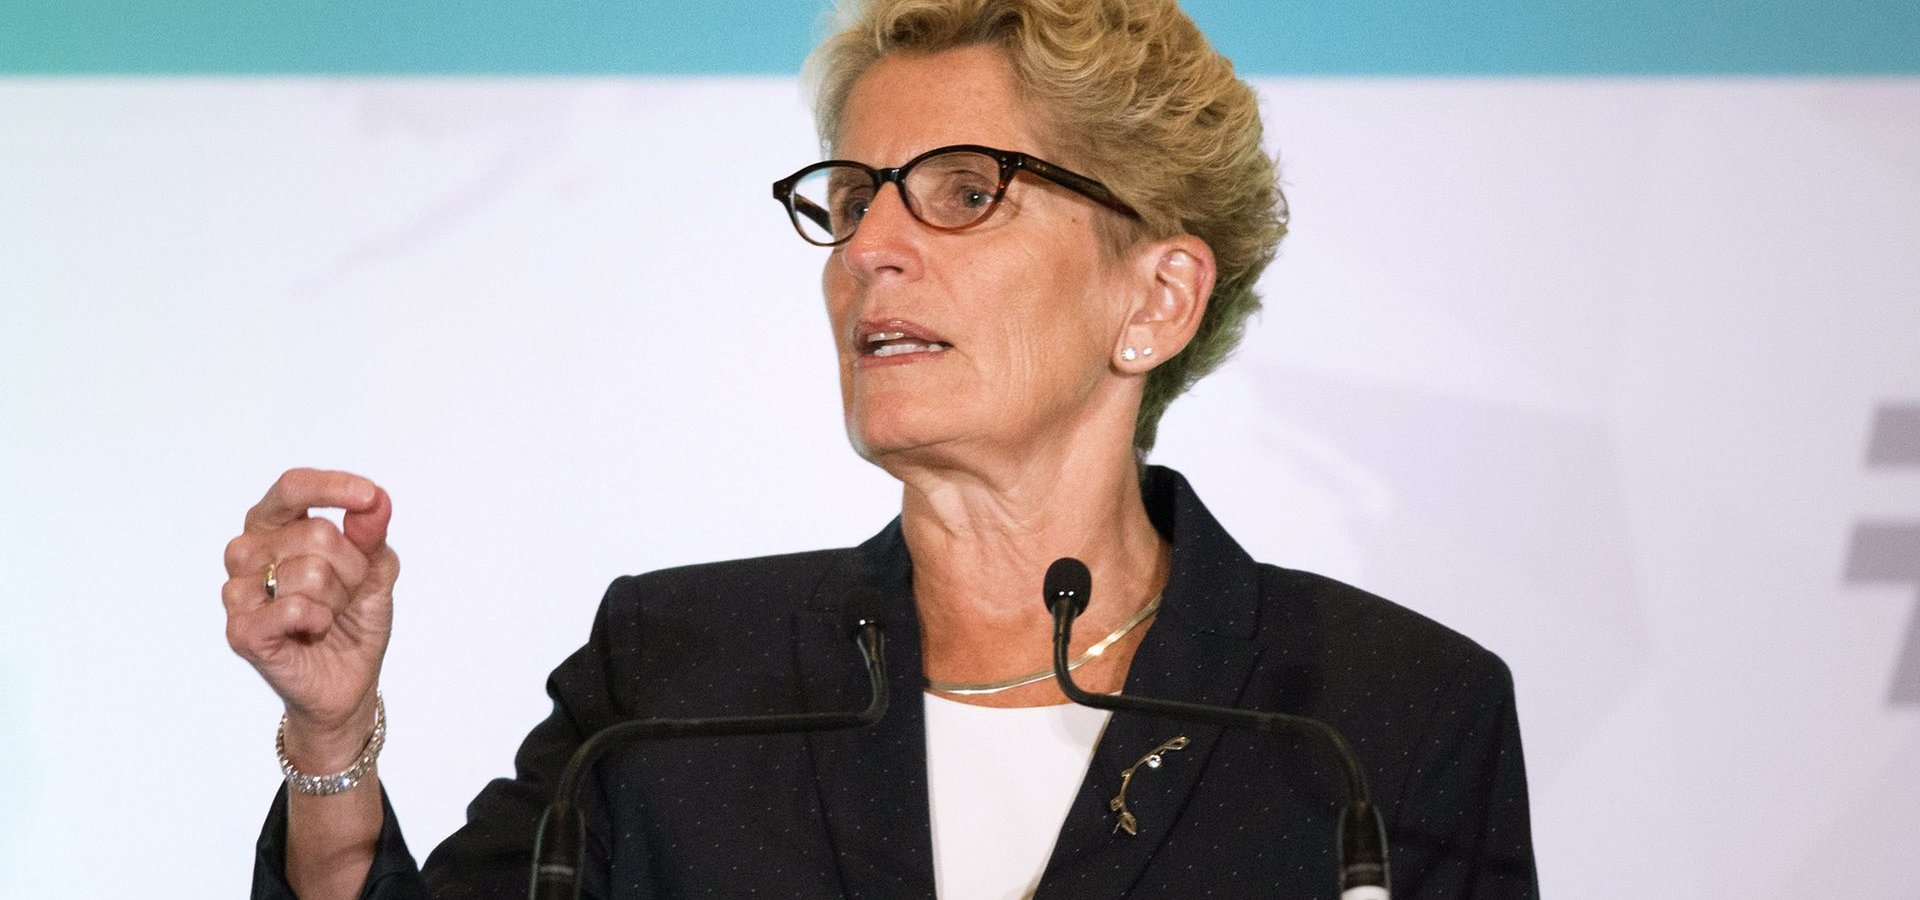 Ontario’s premier, Kathleen Wynne, announced on Monday details of her basic income pilot program, the first in North America in decades.